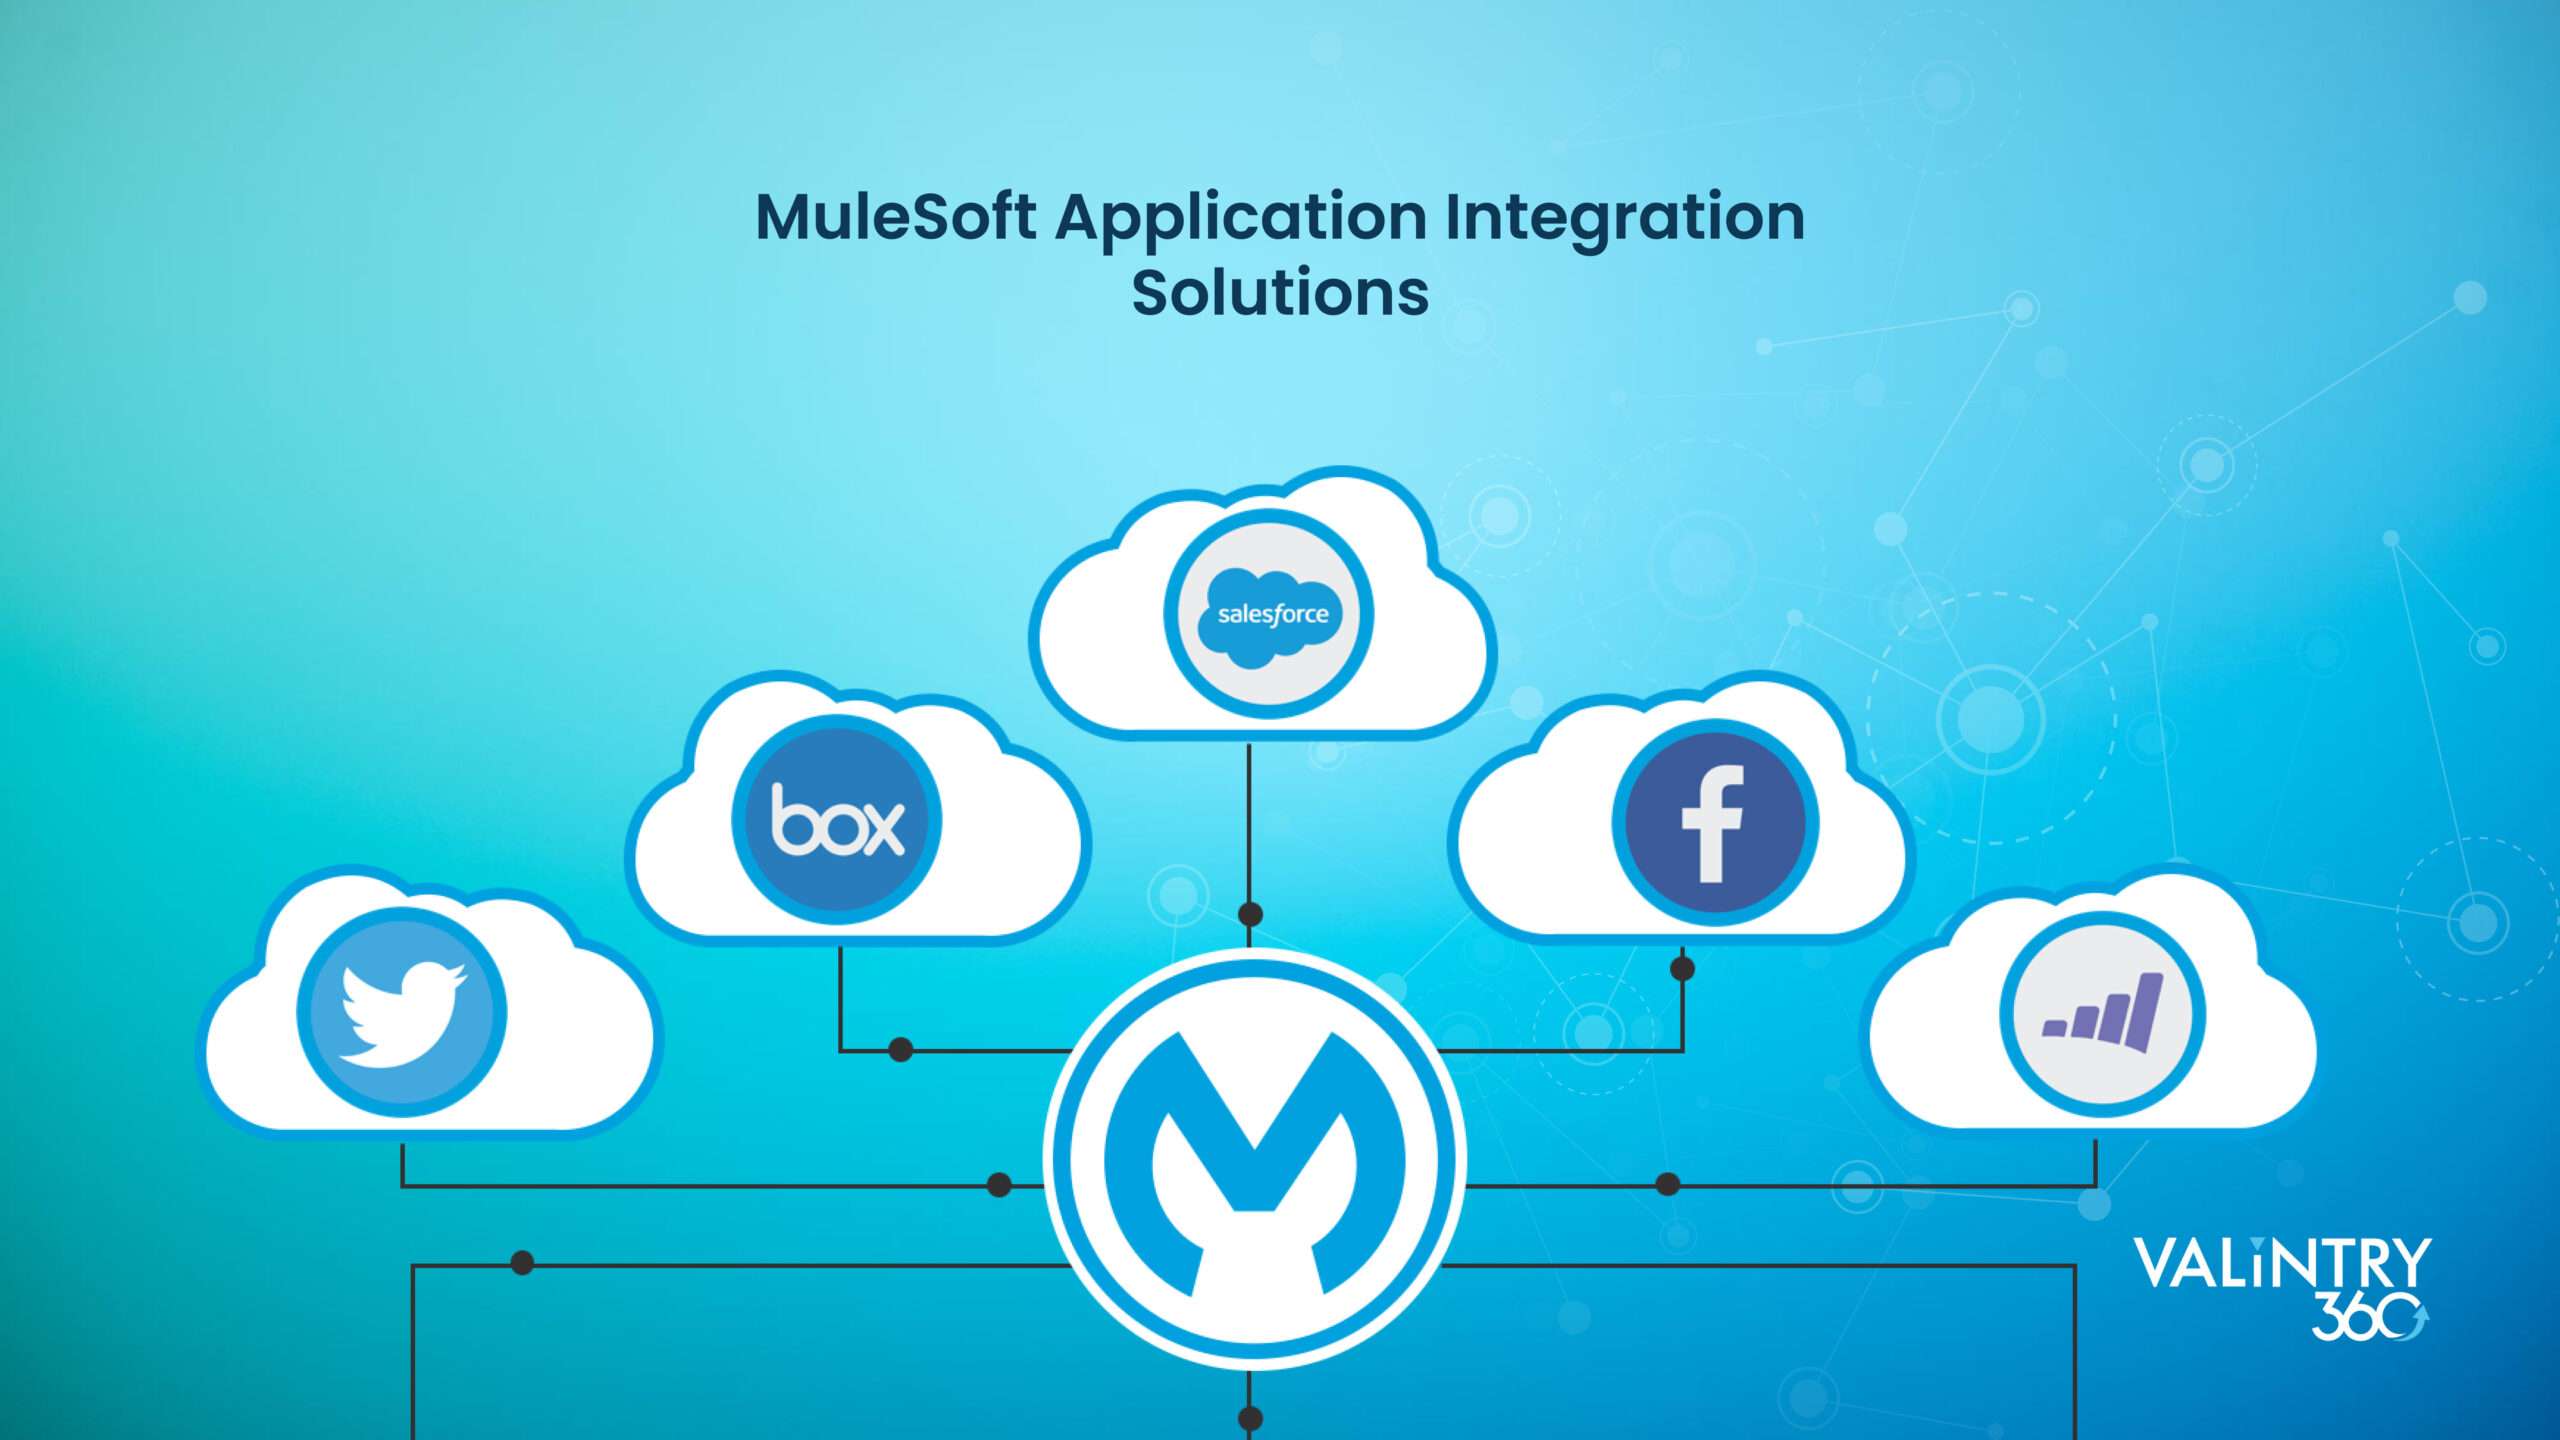 Types of MuleSoft Application Integration Solutions